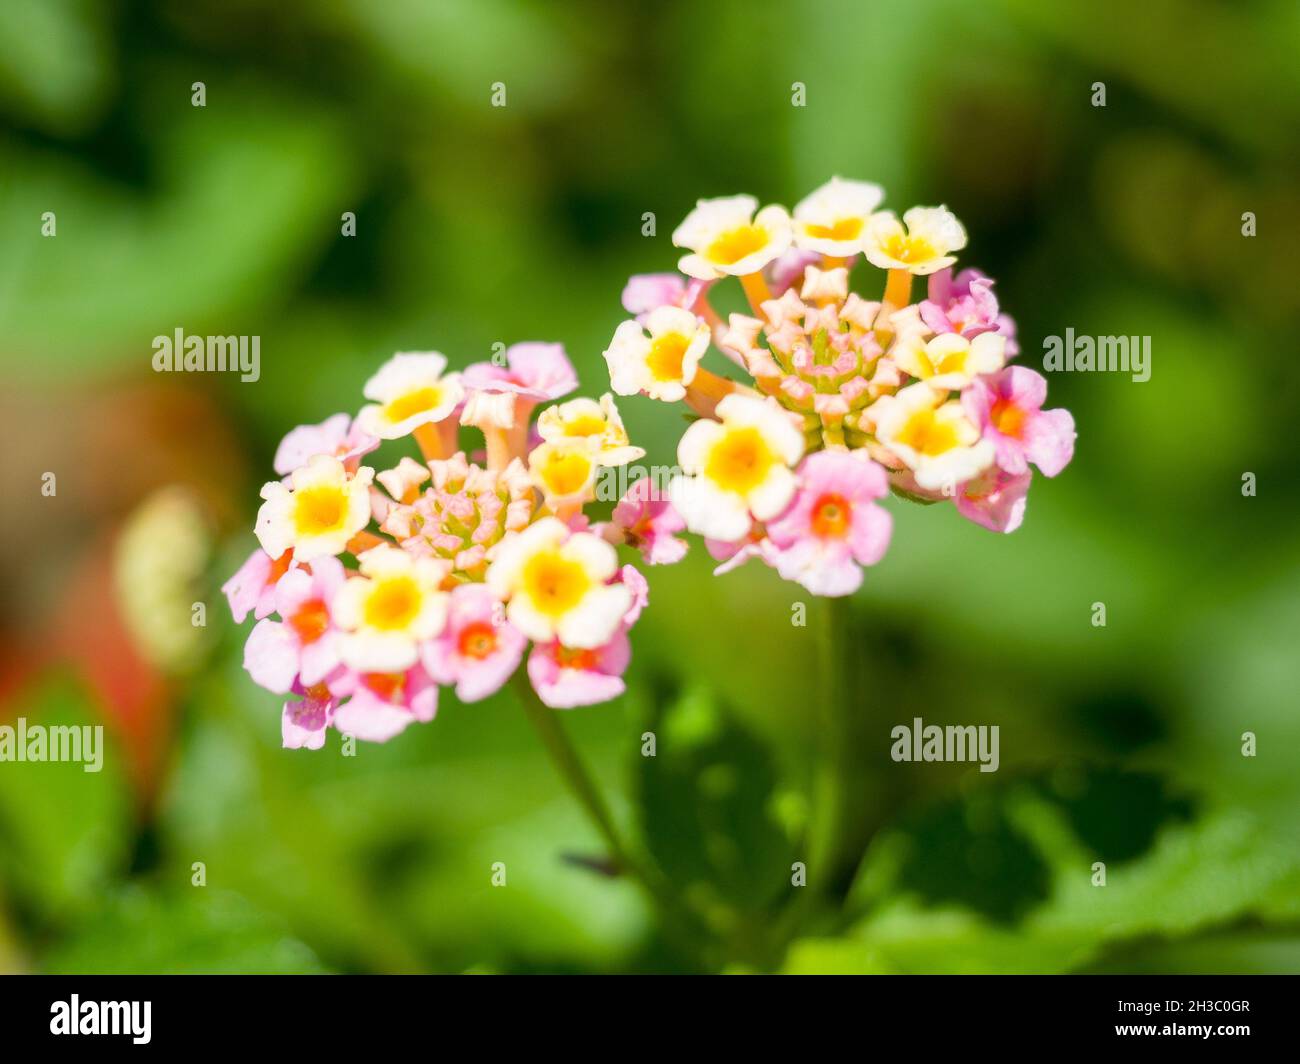 Beautiful flowers of common lantana in the blurred background Stock Photo